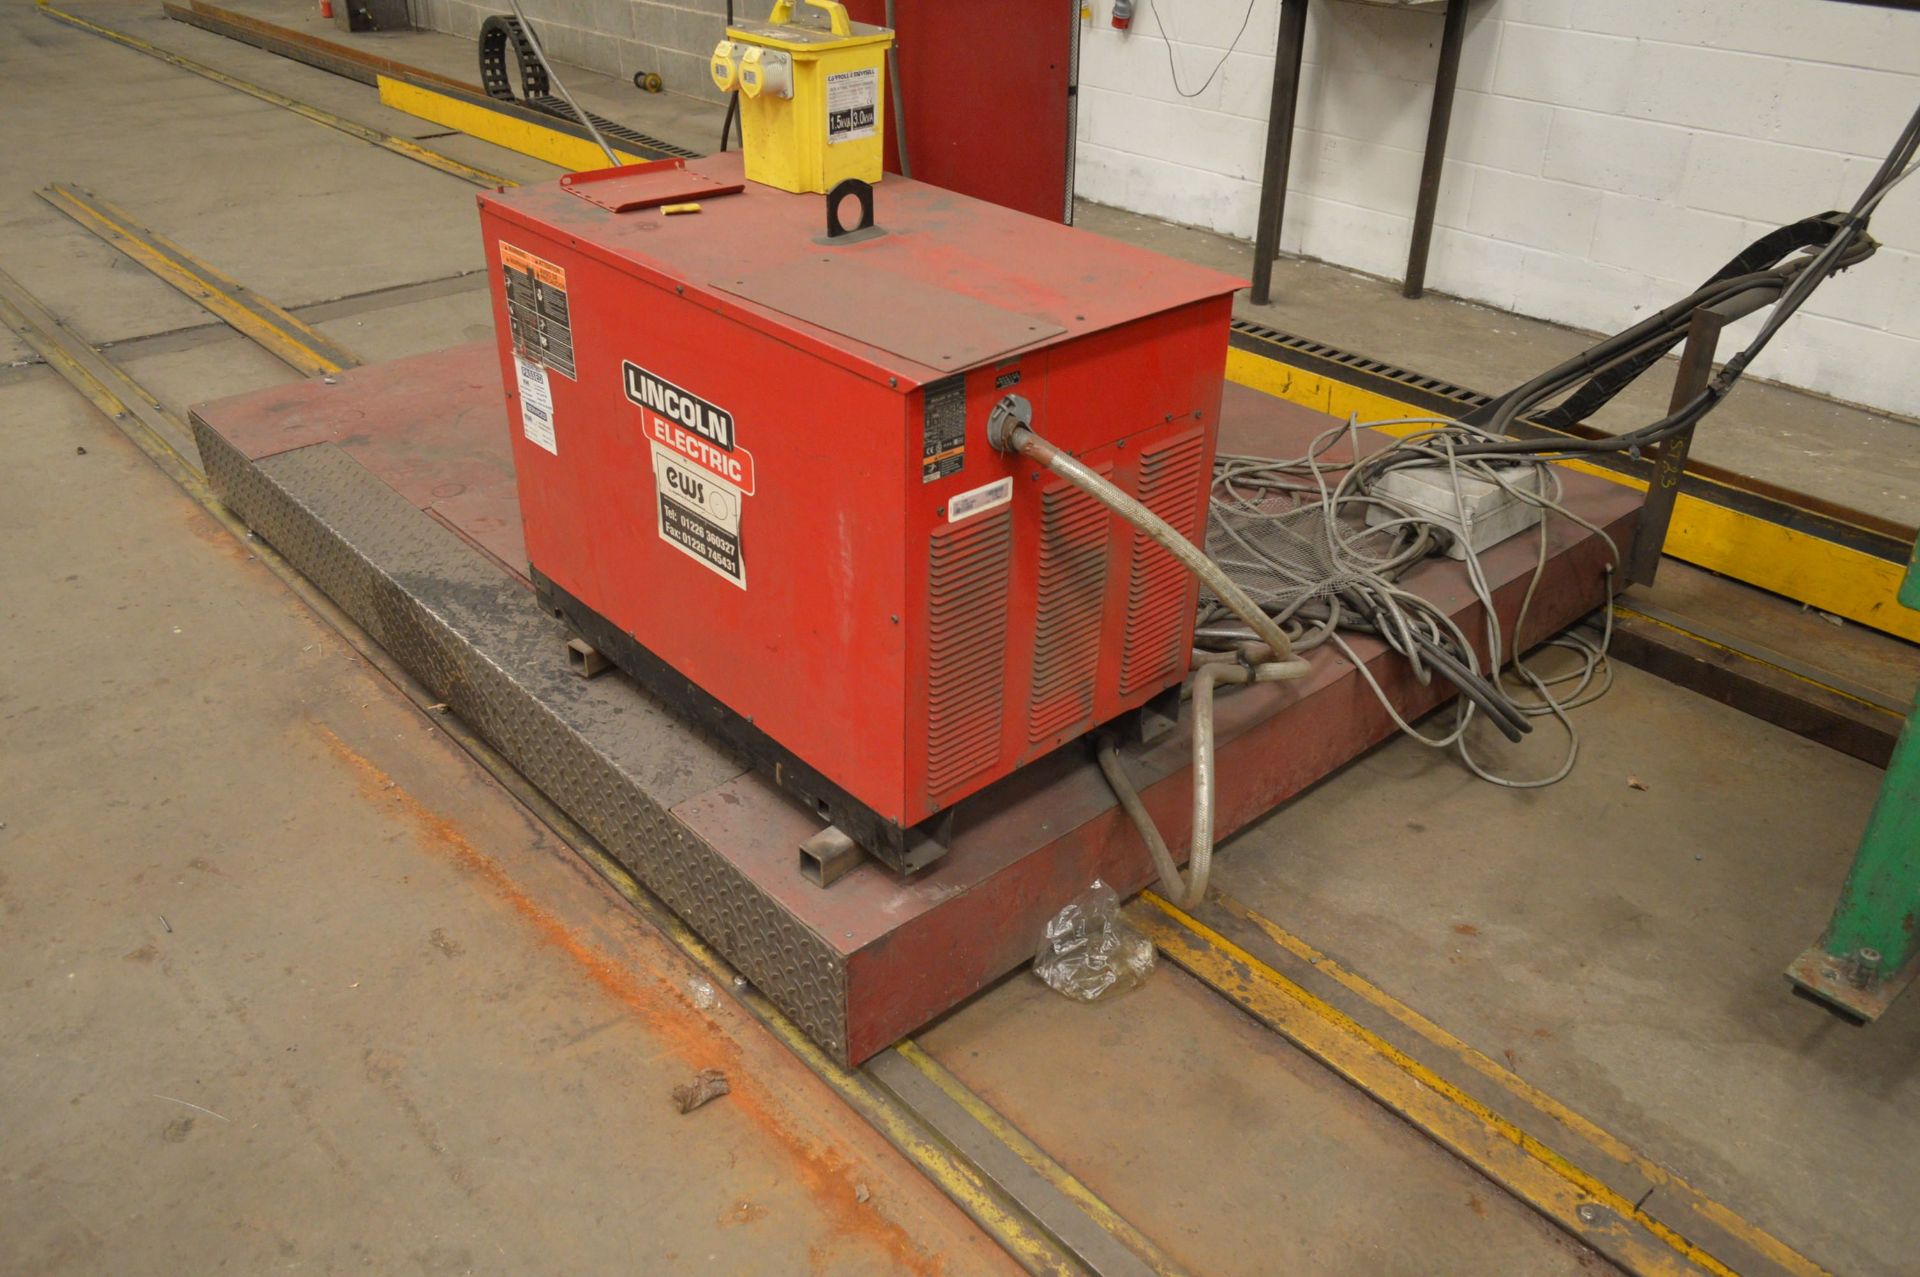 Lincoln Electric RDA-MM3030 COLUMN & BOOM WELDER, serial no. JM-0302, with Lincoln Electric DC1000 - Image 5 of 5